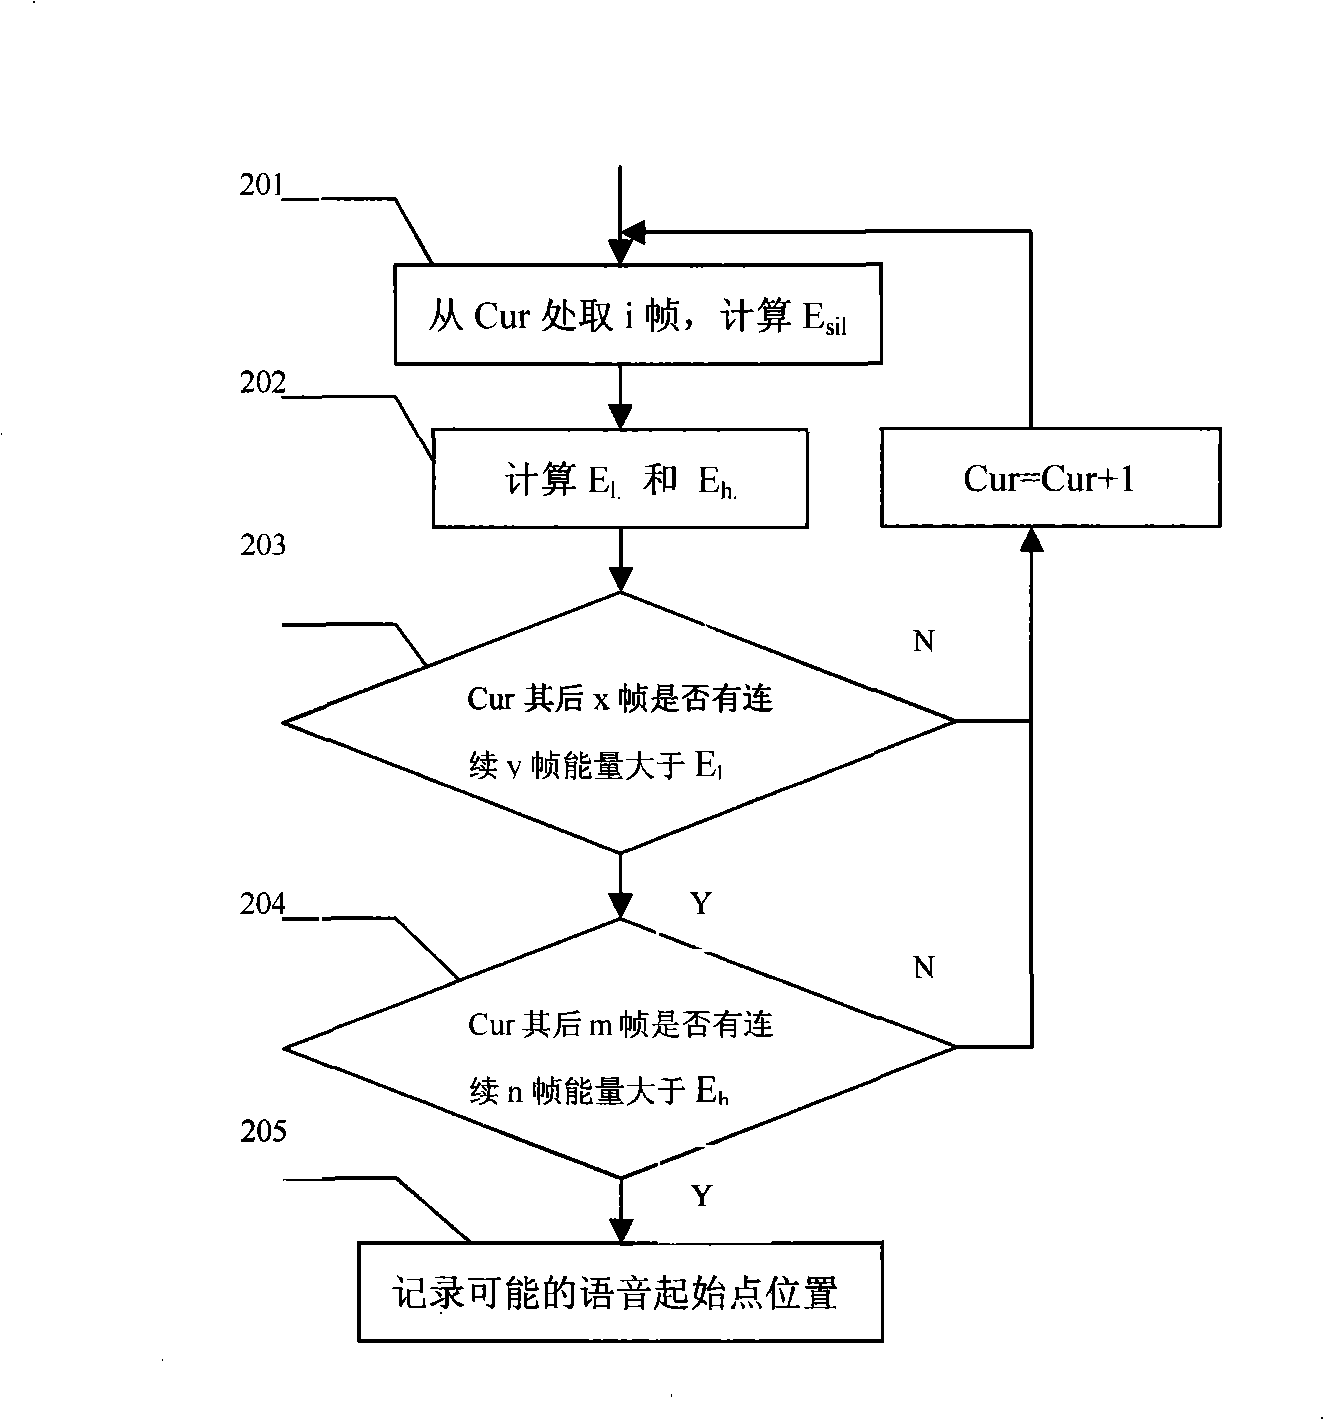 End-point detecting method applied to speech identification system